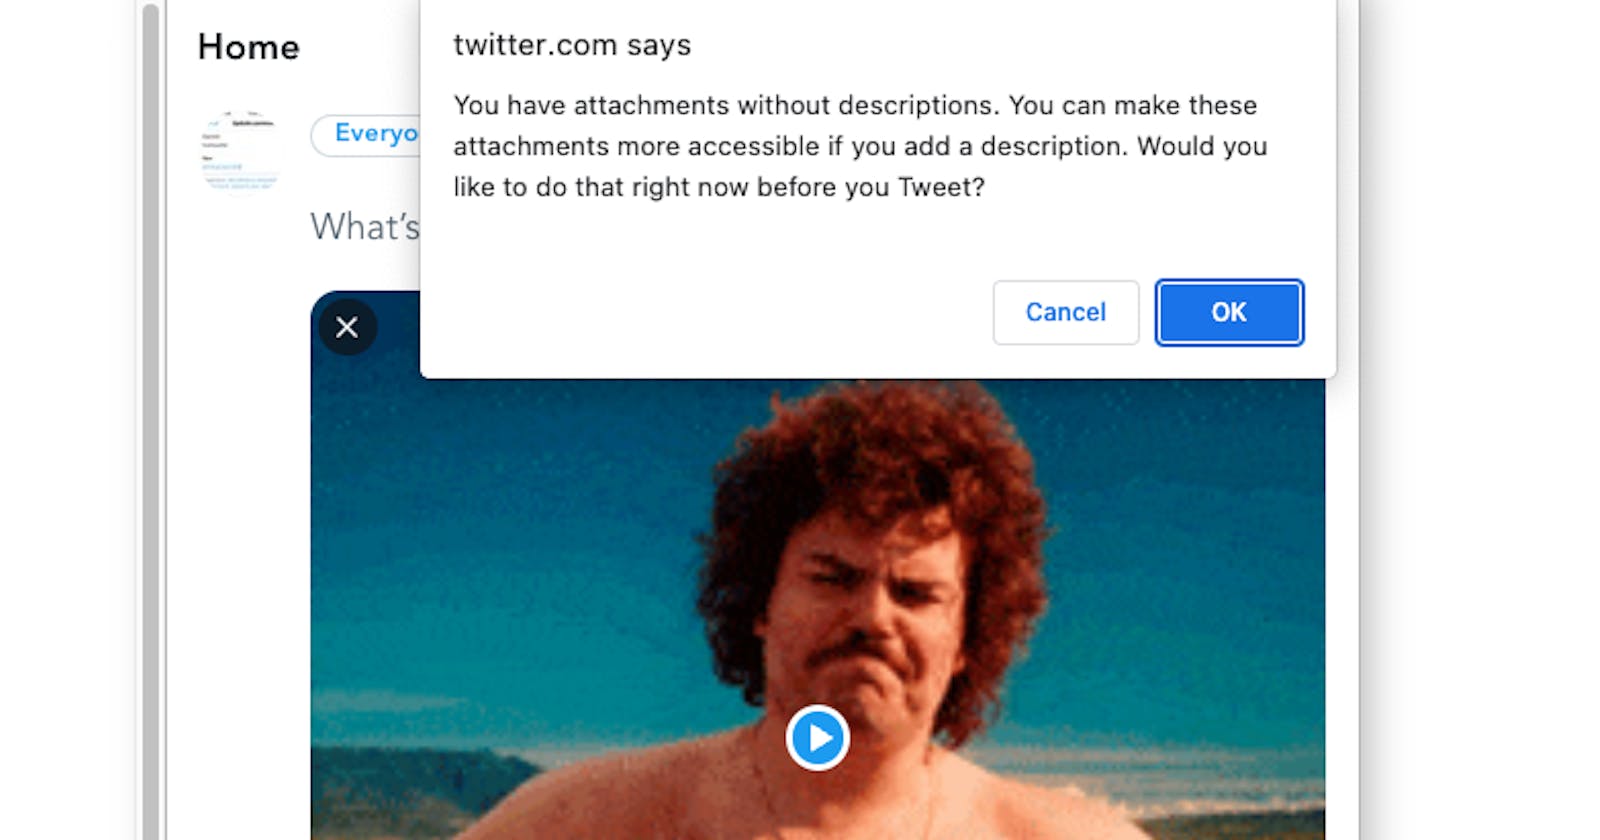 a11y-twitter: a browser extension for making Tweets more accessible